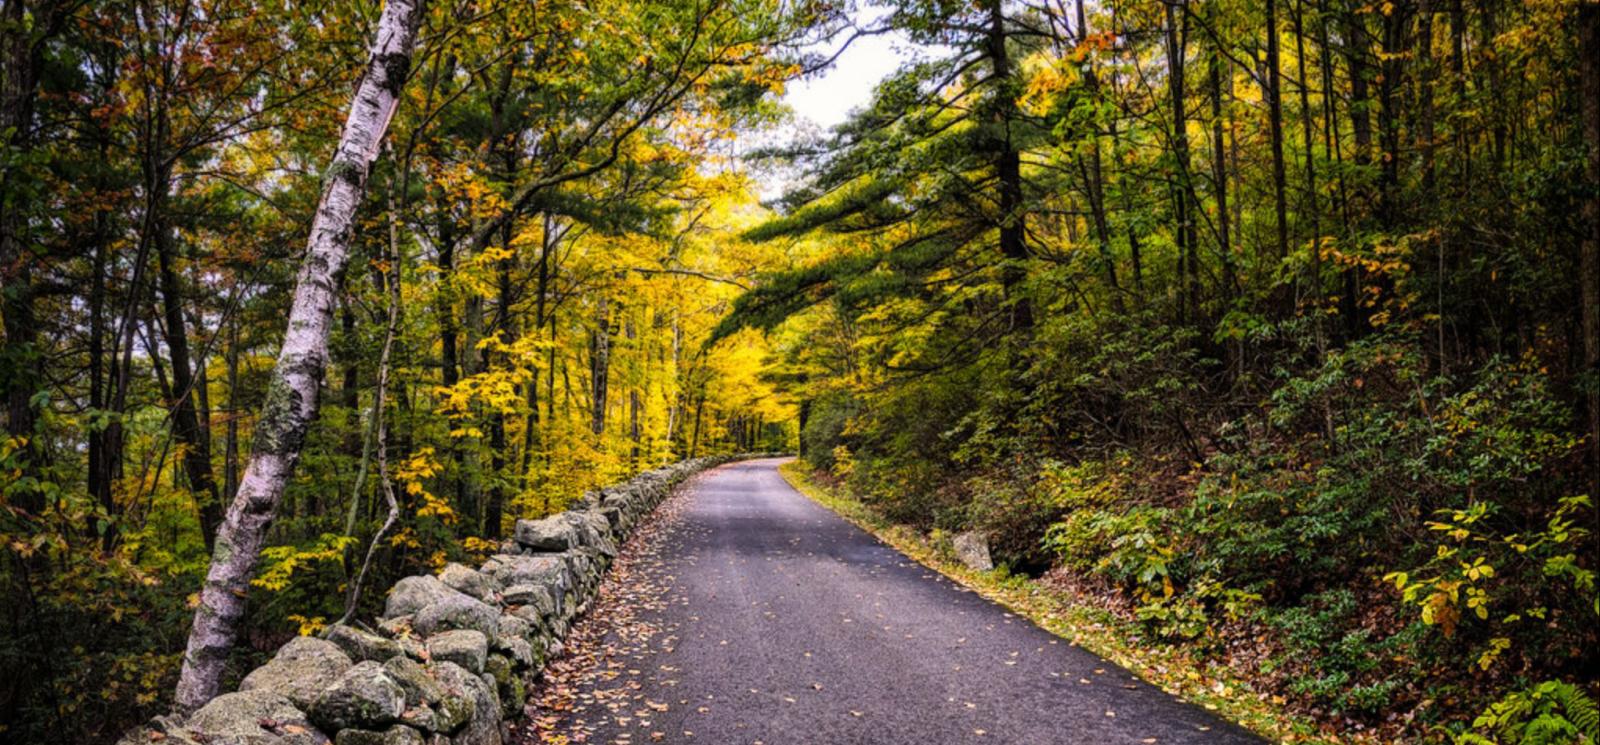 A road with stone wall through a forest in the fall (Flickr@CraigSzymanski)